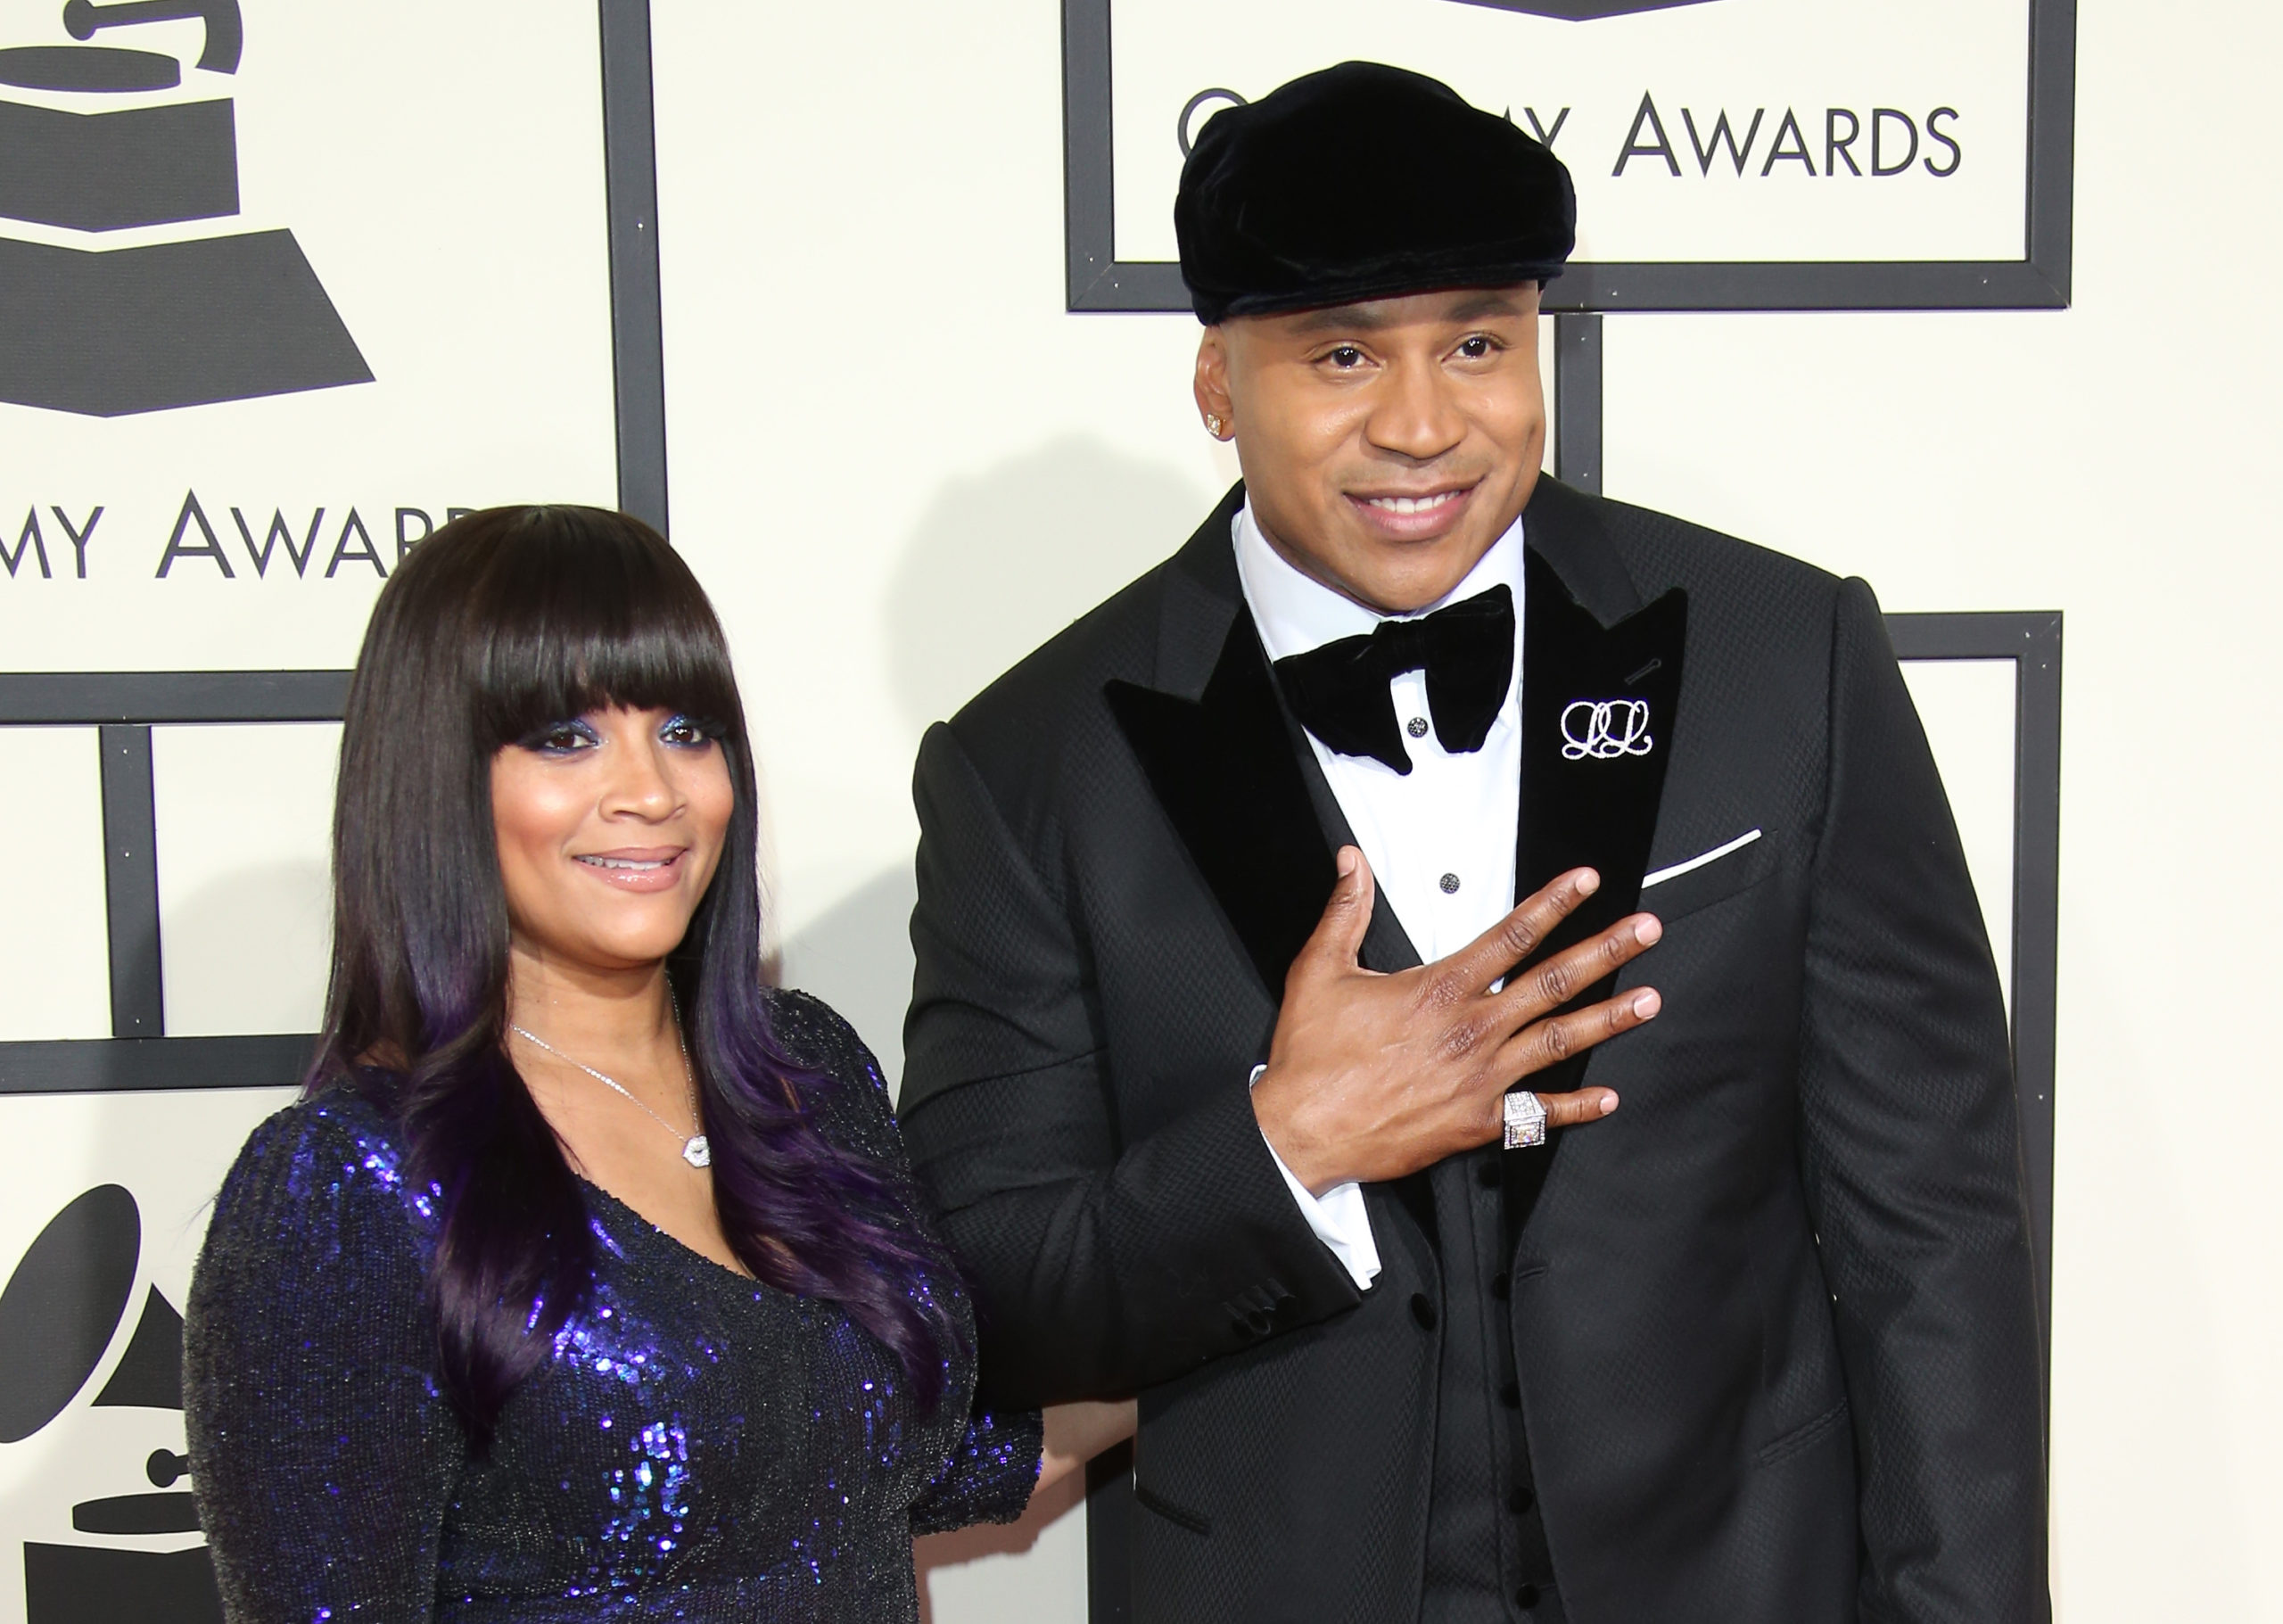 LL Cool J wife Simone Smith Rocking a New Look in a Stunning Blue Dress!